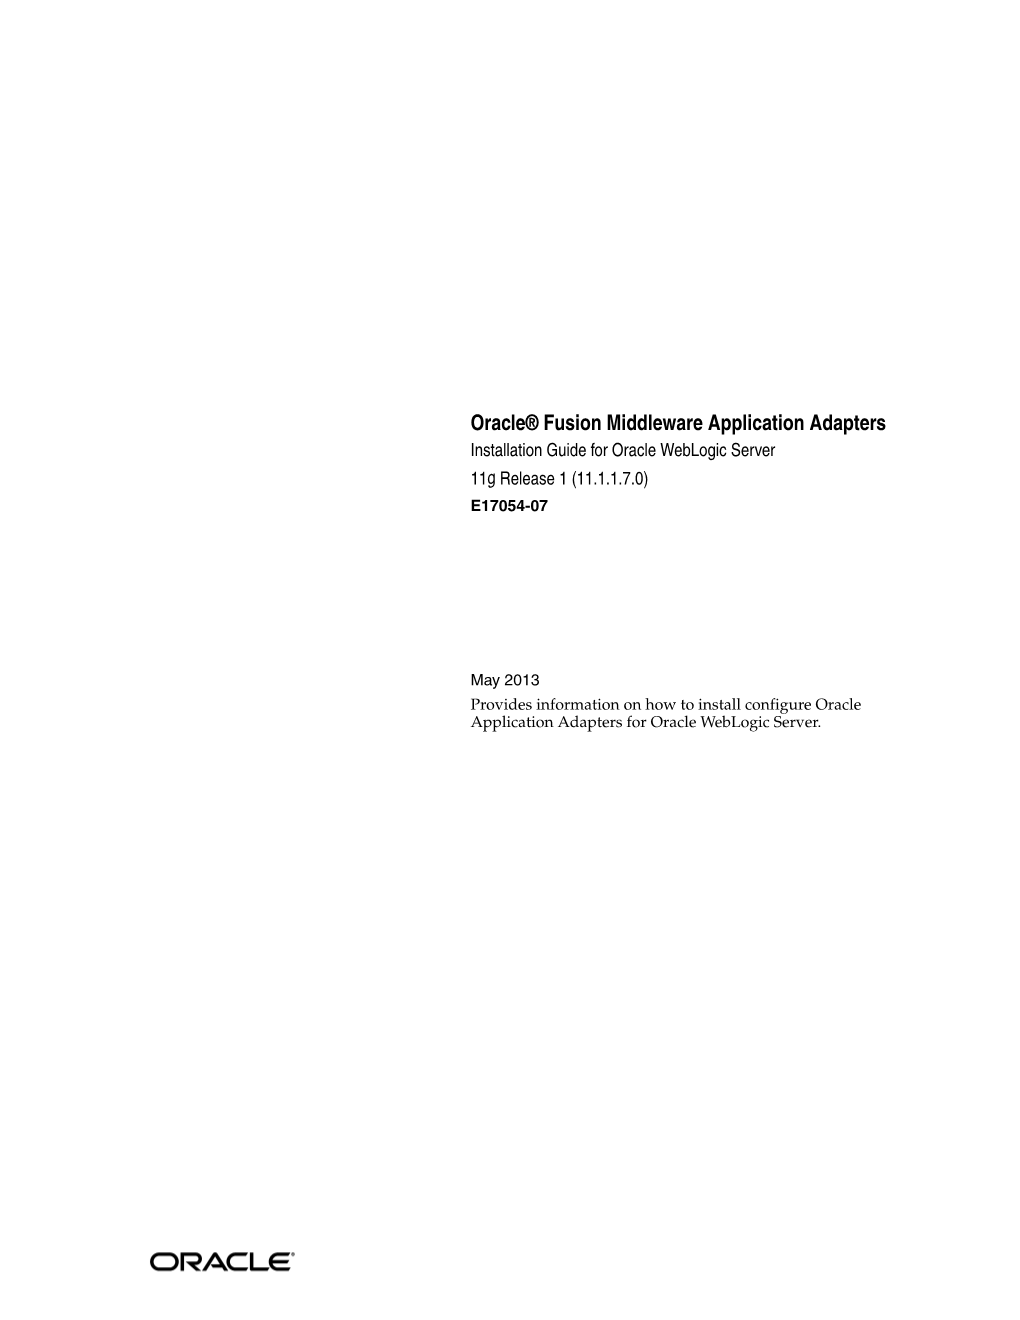 Oracle Fusion Middleware Application Adapters Installation Guide for Oracle Weblogic Server, 11G Release 1 (11.1.1.7.0) E17054-07